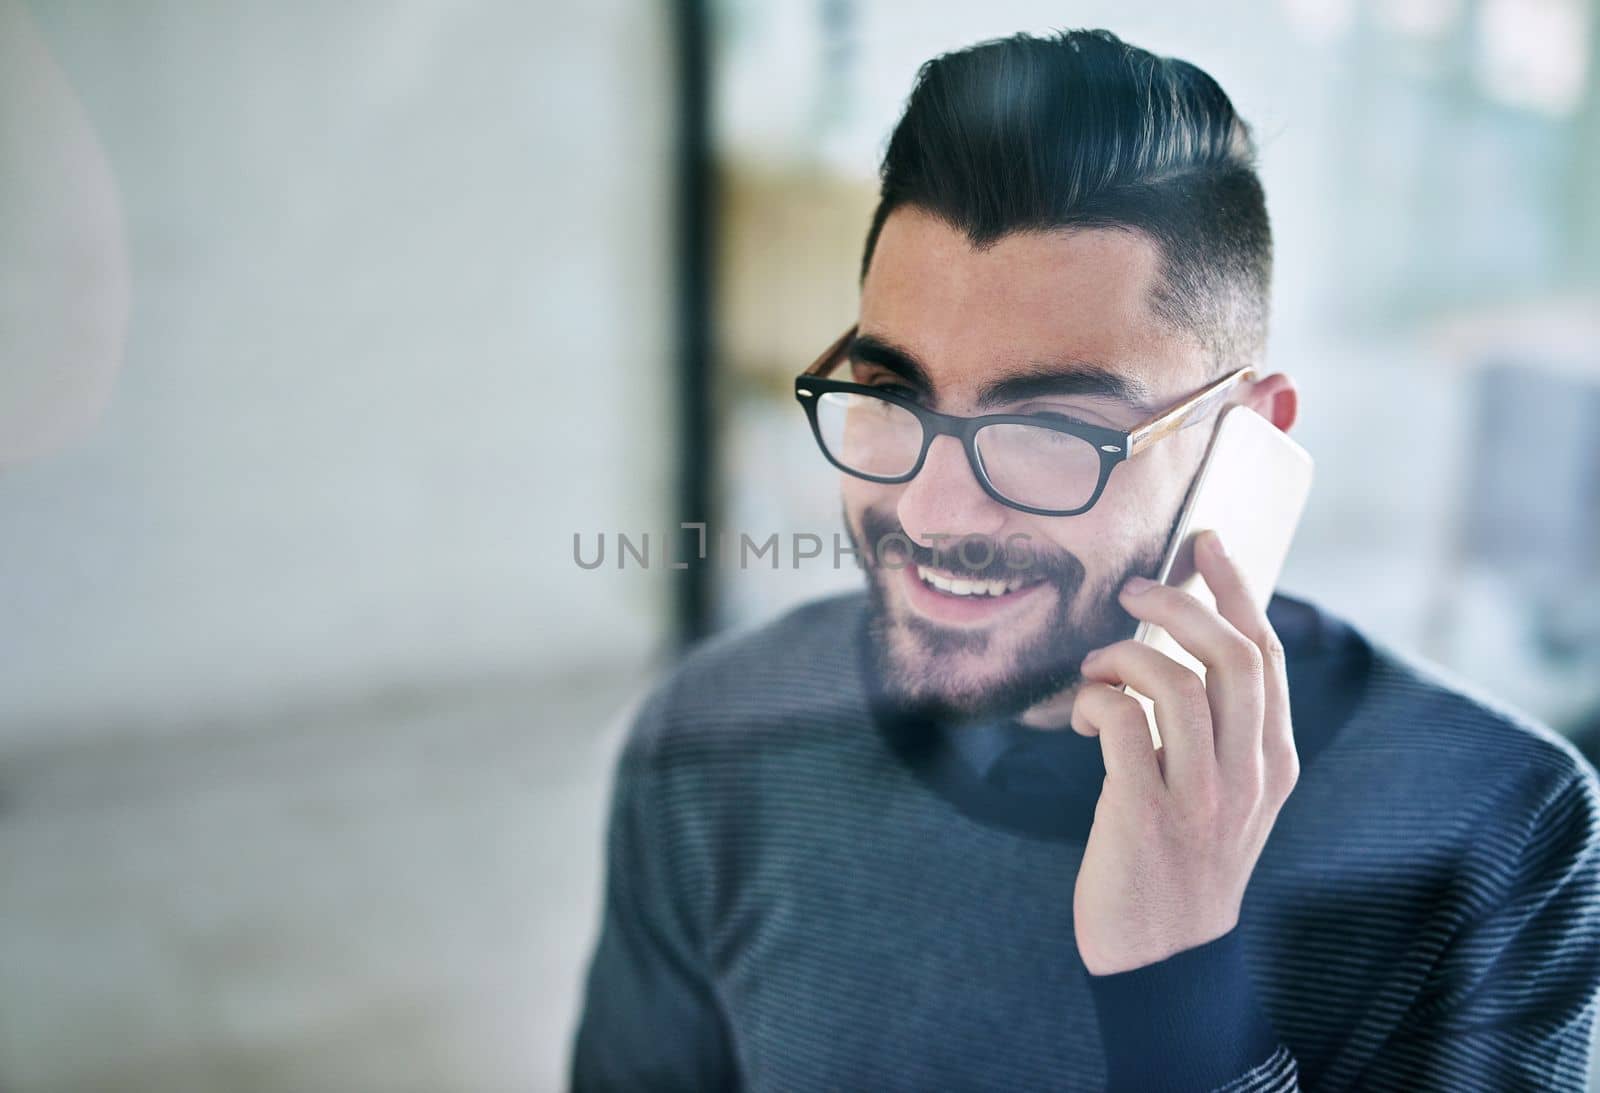 Growing his business connections. a young designer talking on a cellphone in an office